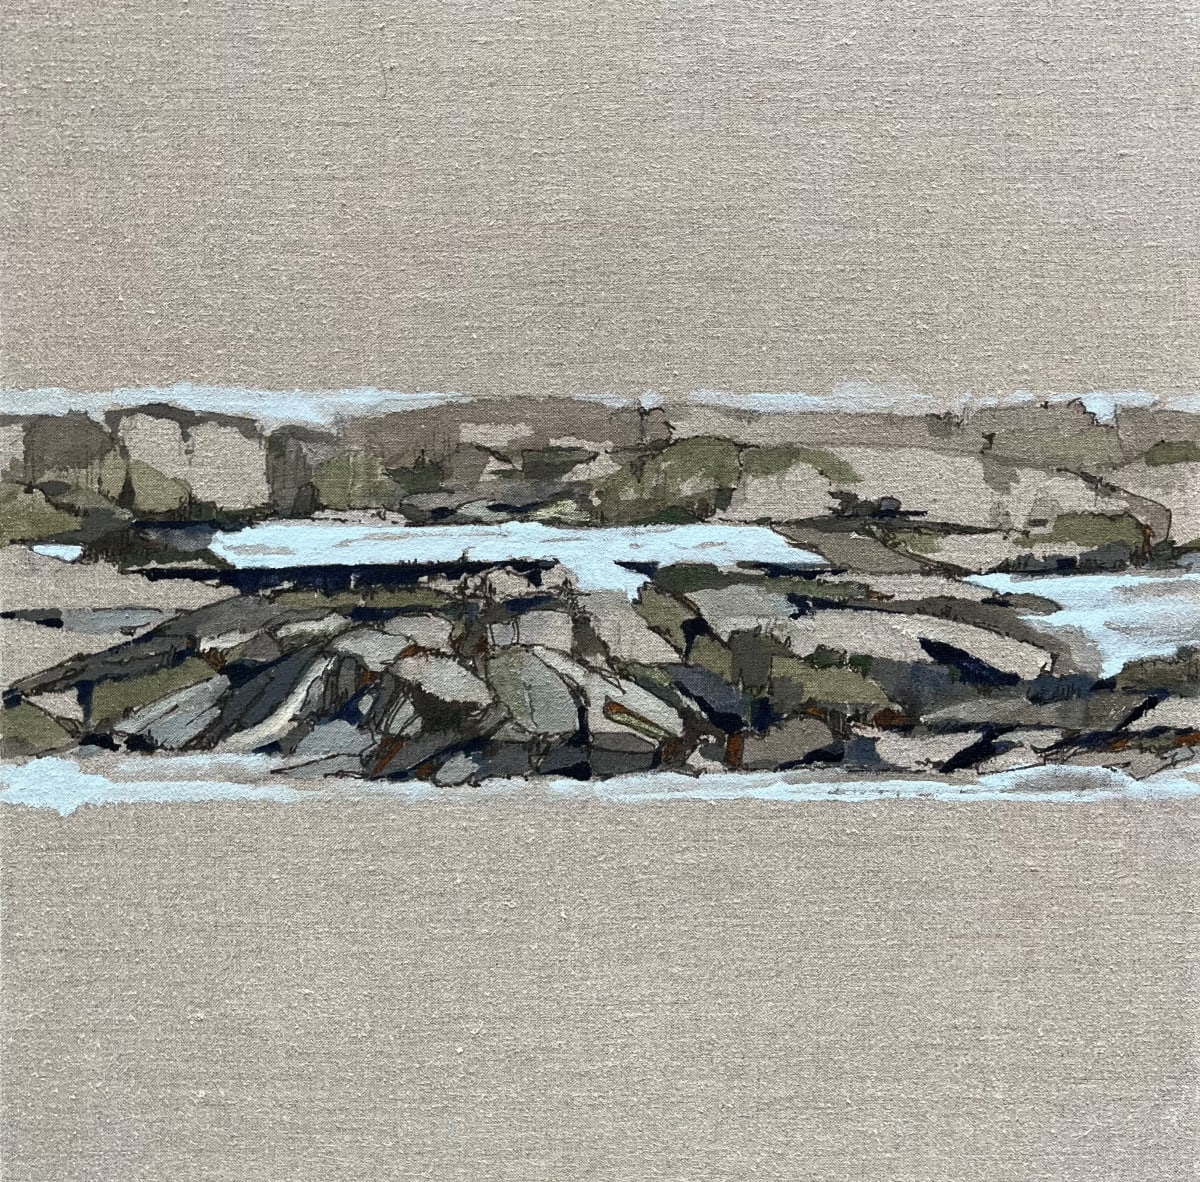 Ponds, No.1  (Sequential) by Barbara Houston  Image: Pond No.1, available individually or as a quadriptych